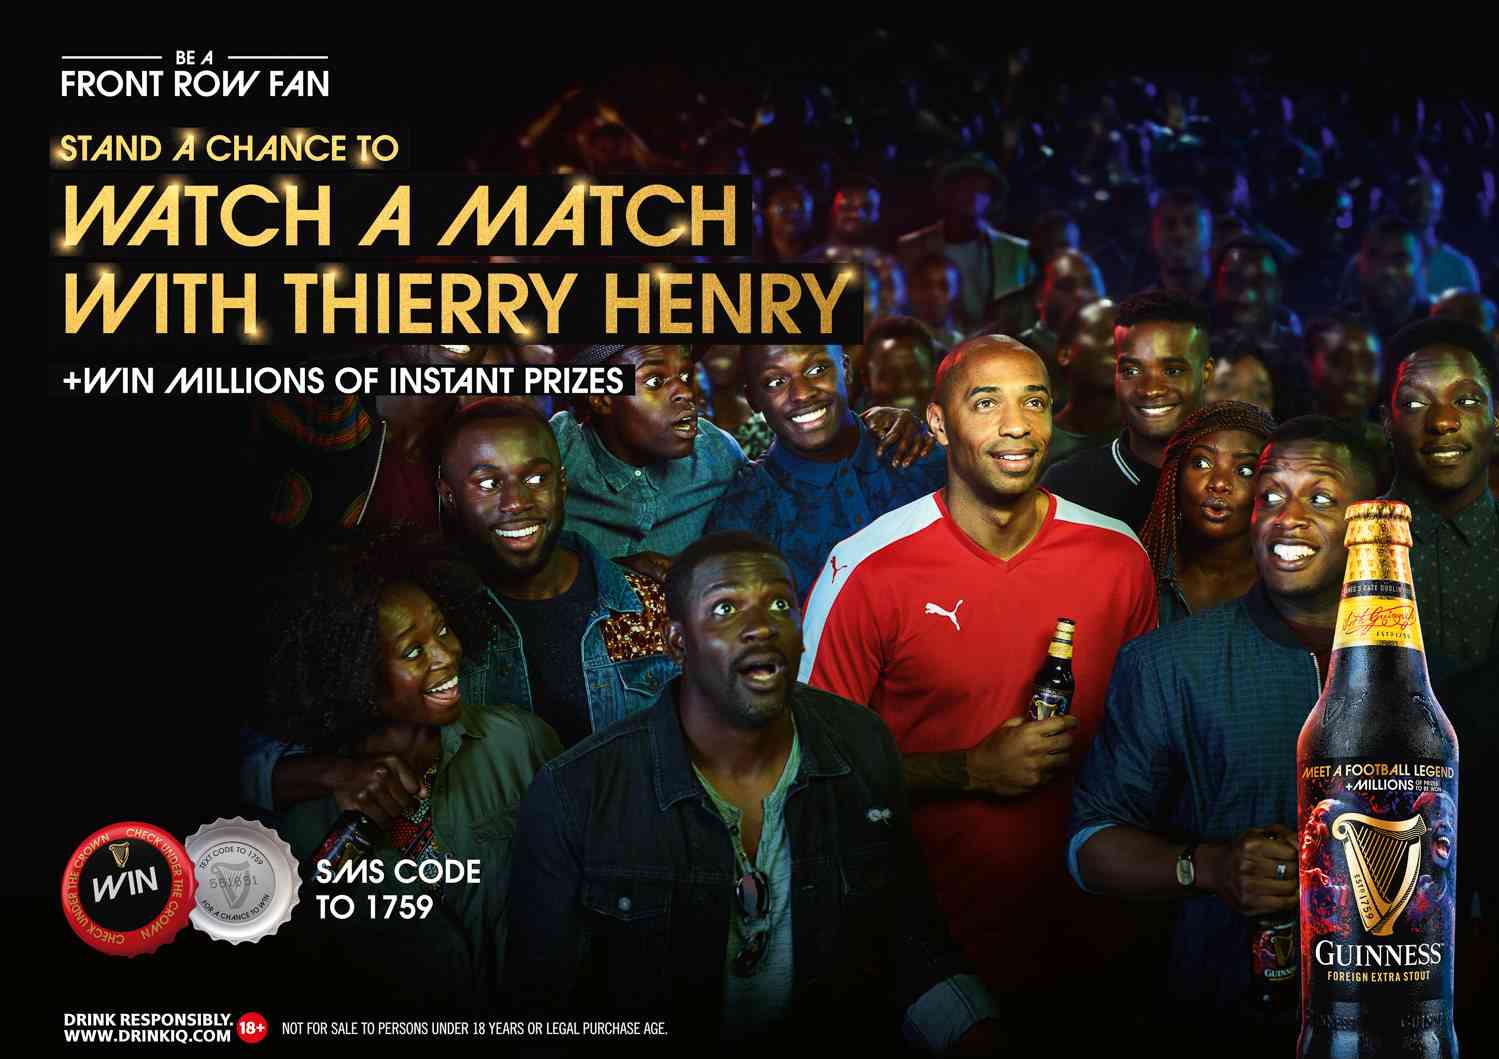 thierry henry in Guiness beer photo by saint